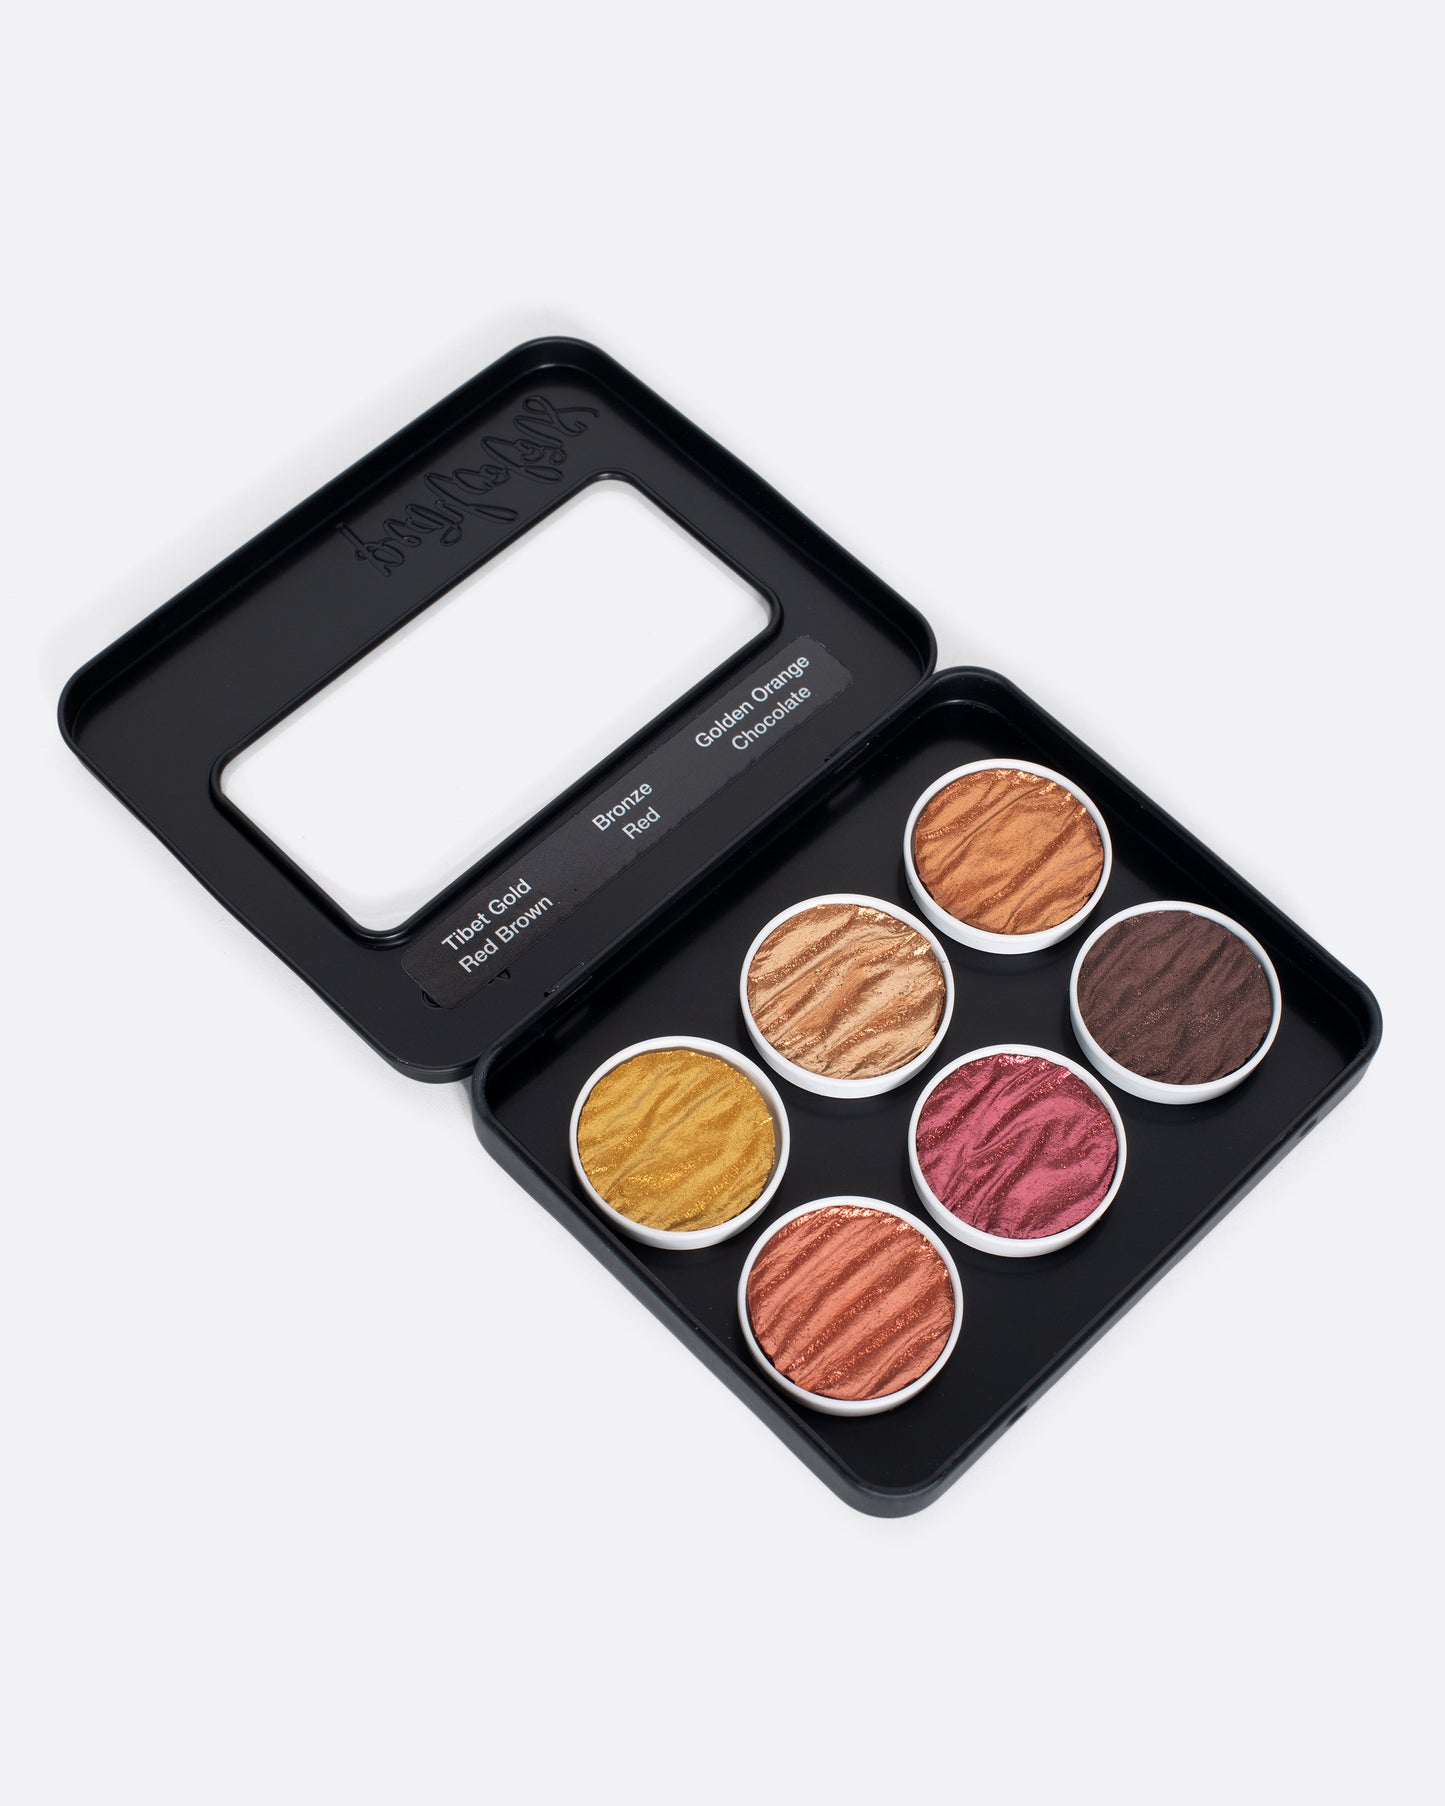 Made in Germany, this metallic watercolor set features colors themed like tones of the earth